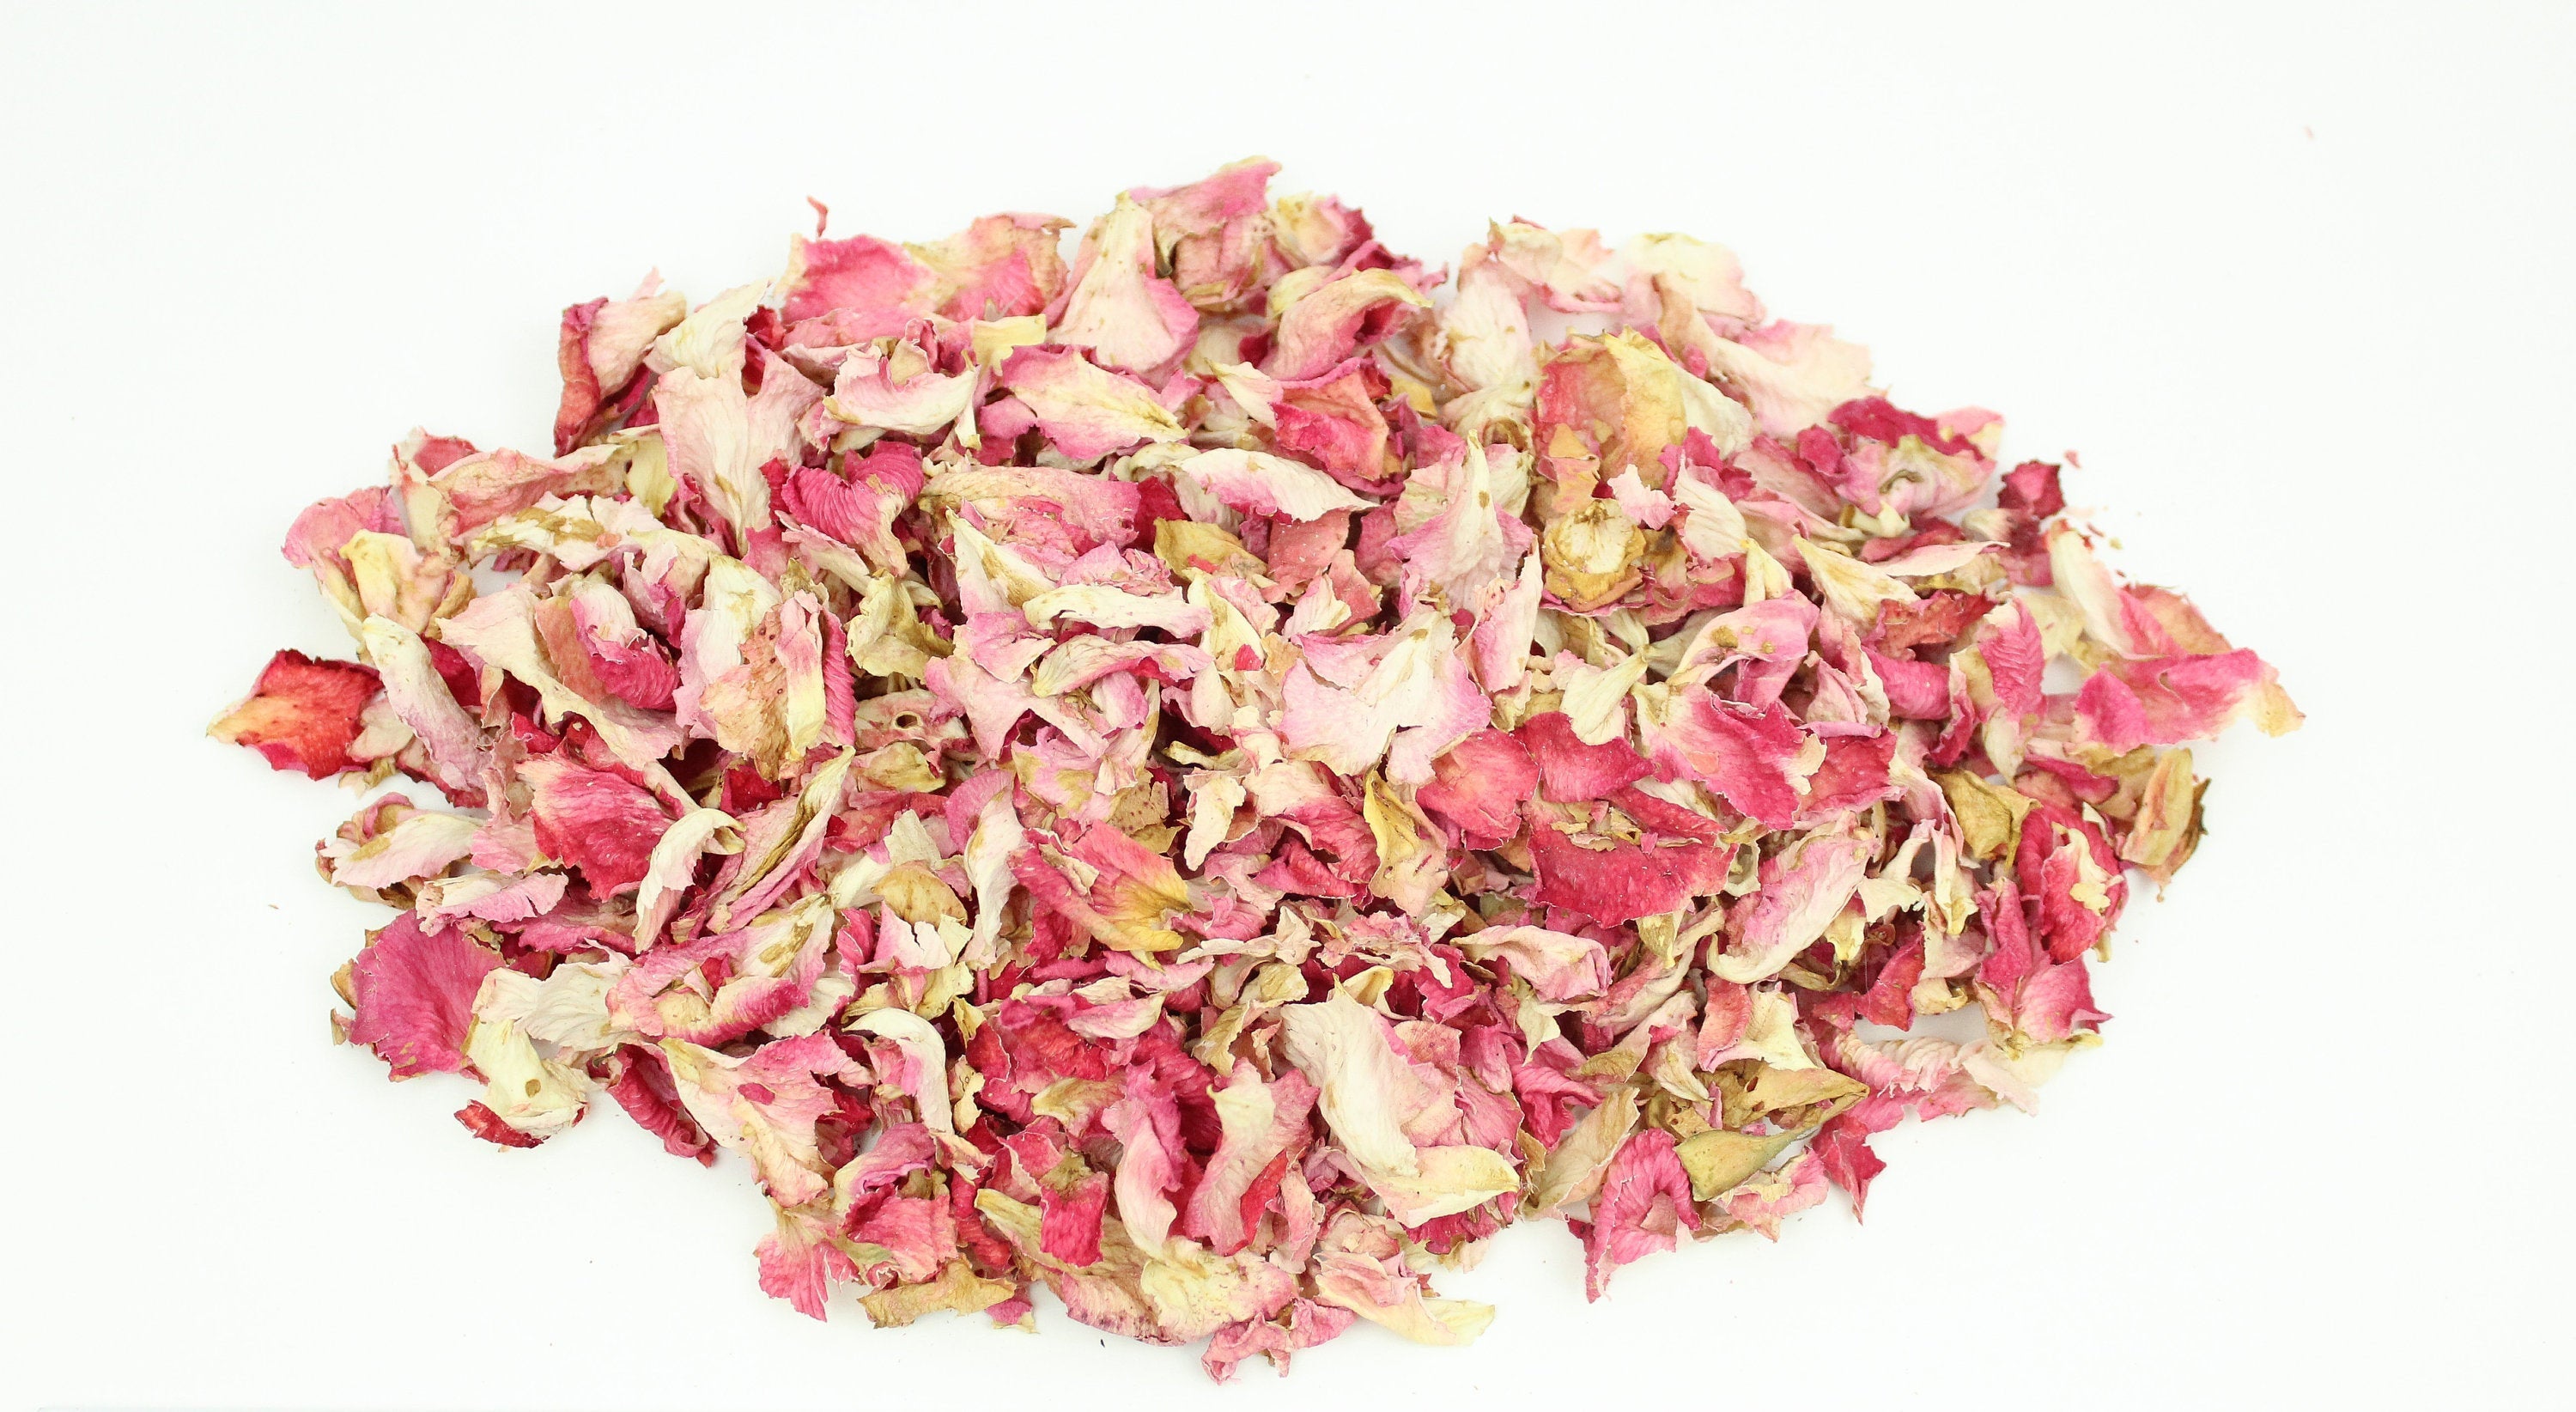 Red and yellow rose petals, High Quality, Natural, Organic, Biodegraddable, Wedding, Craft, Edible, Confetti, Wedding toss, Wedding confetti